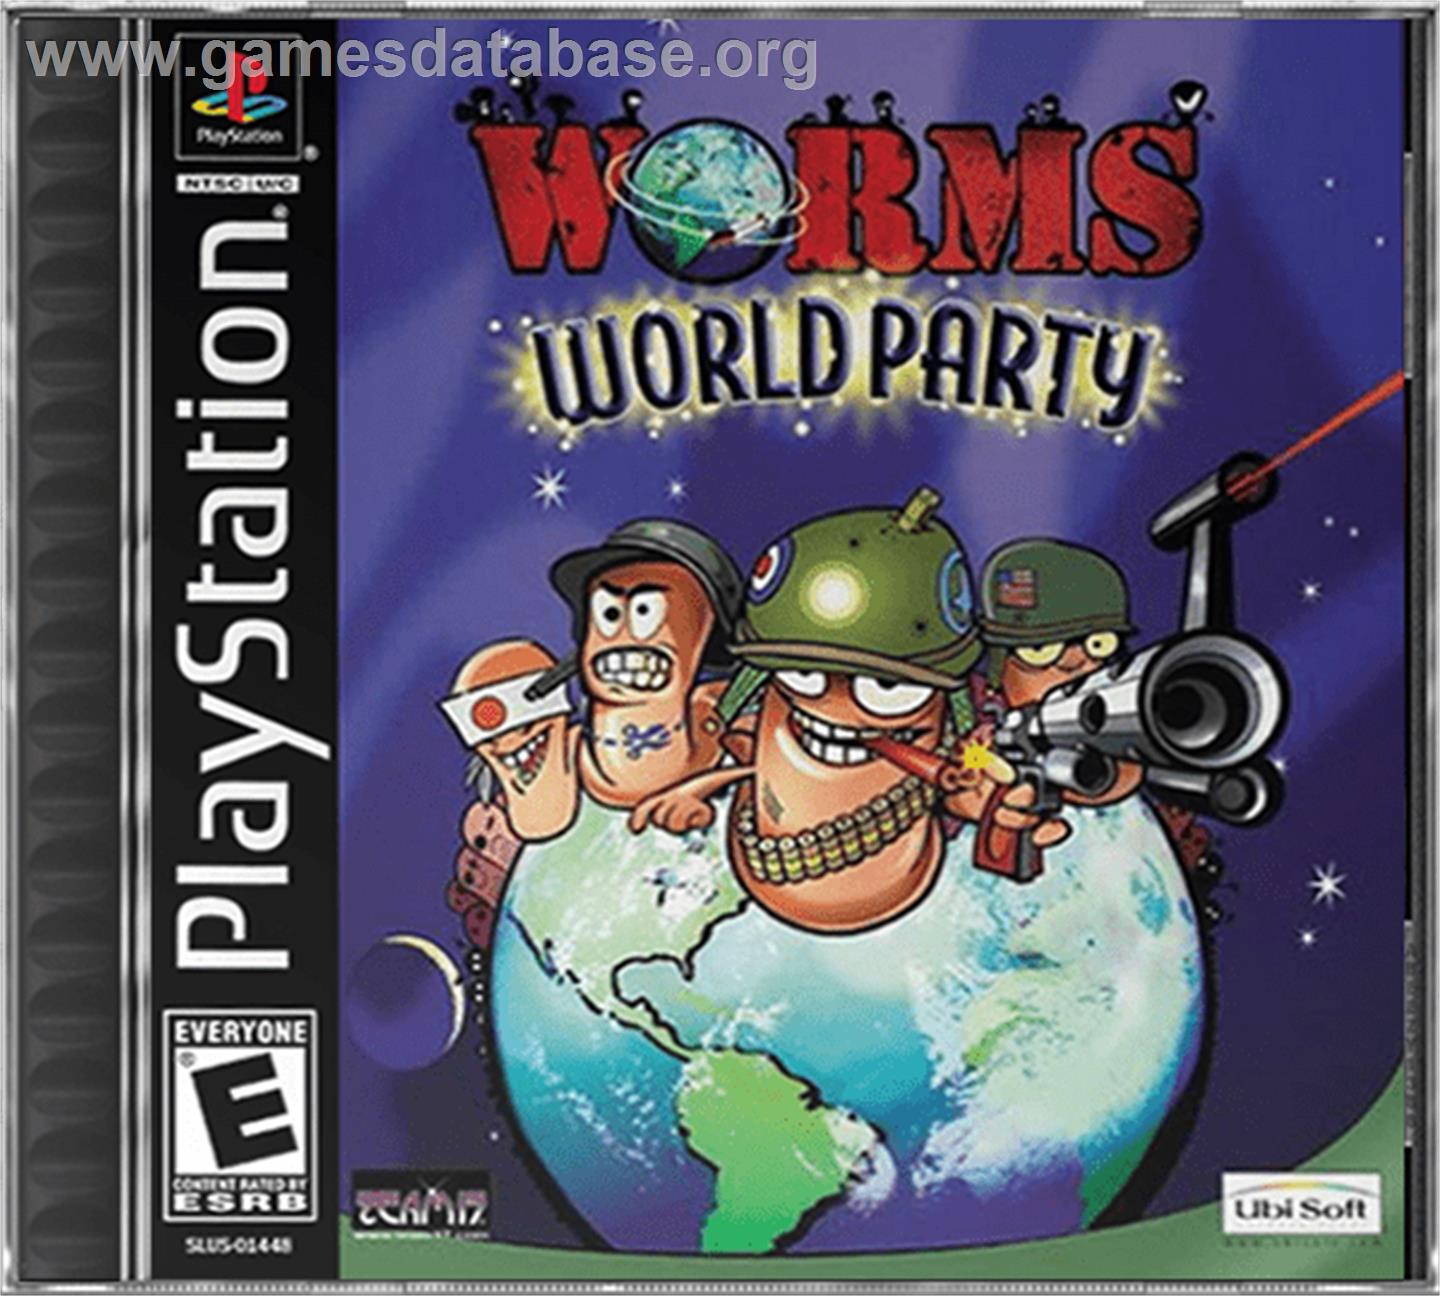 Worms World Party - Sony Playstation - Artwork - Box